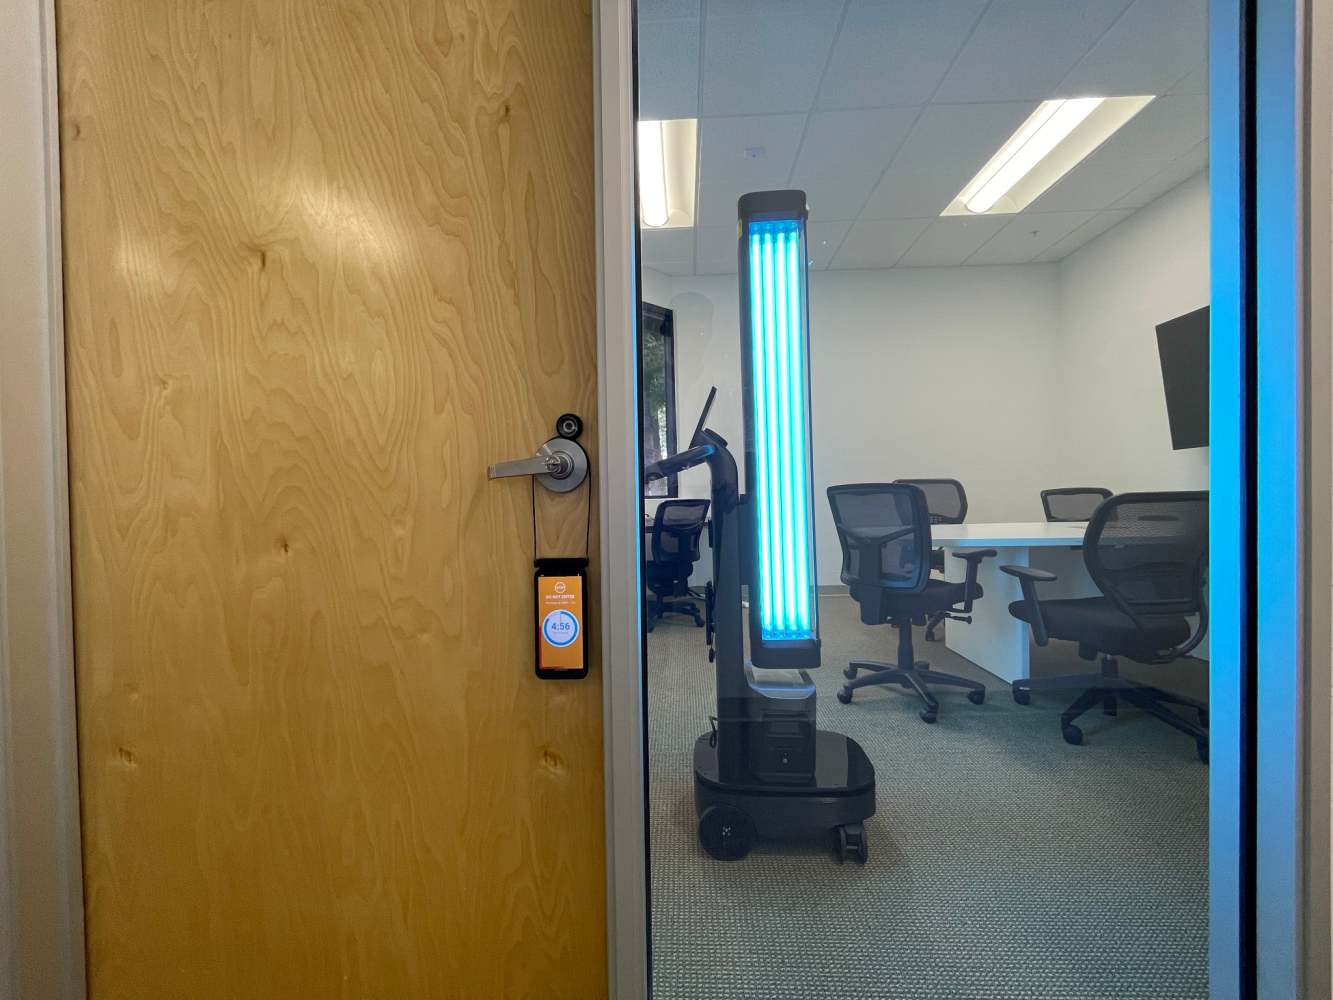 UV disinfection robots behind glass